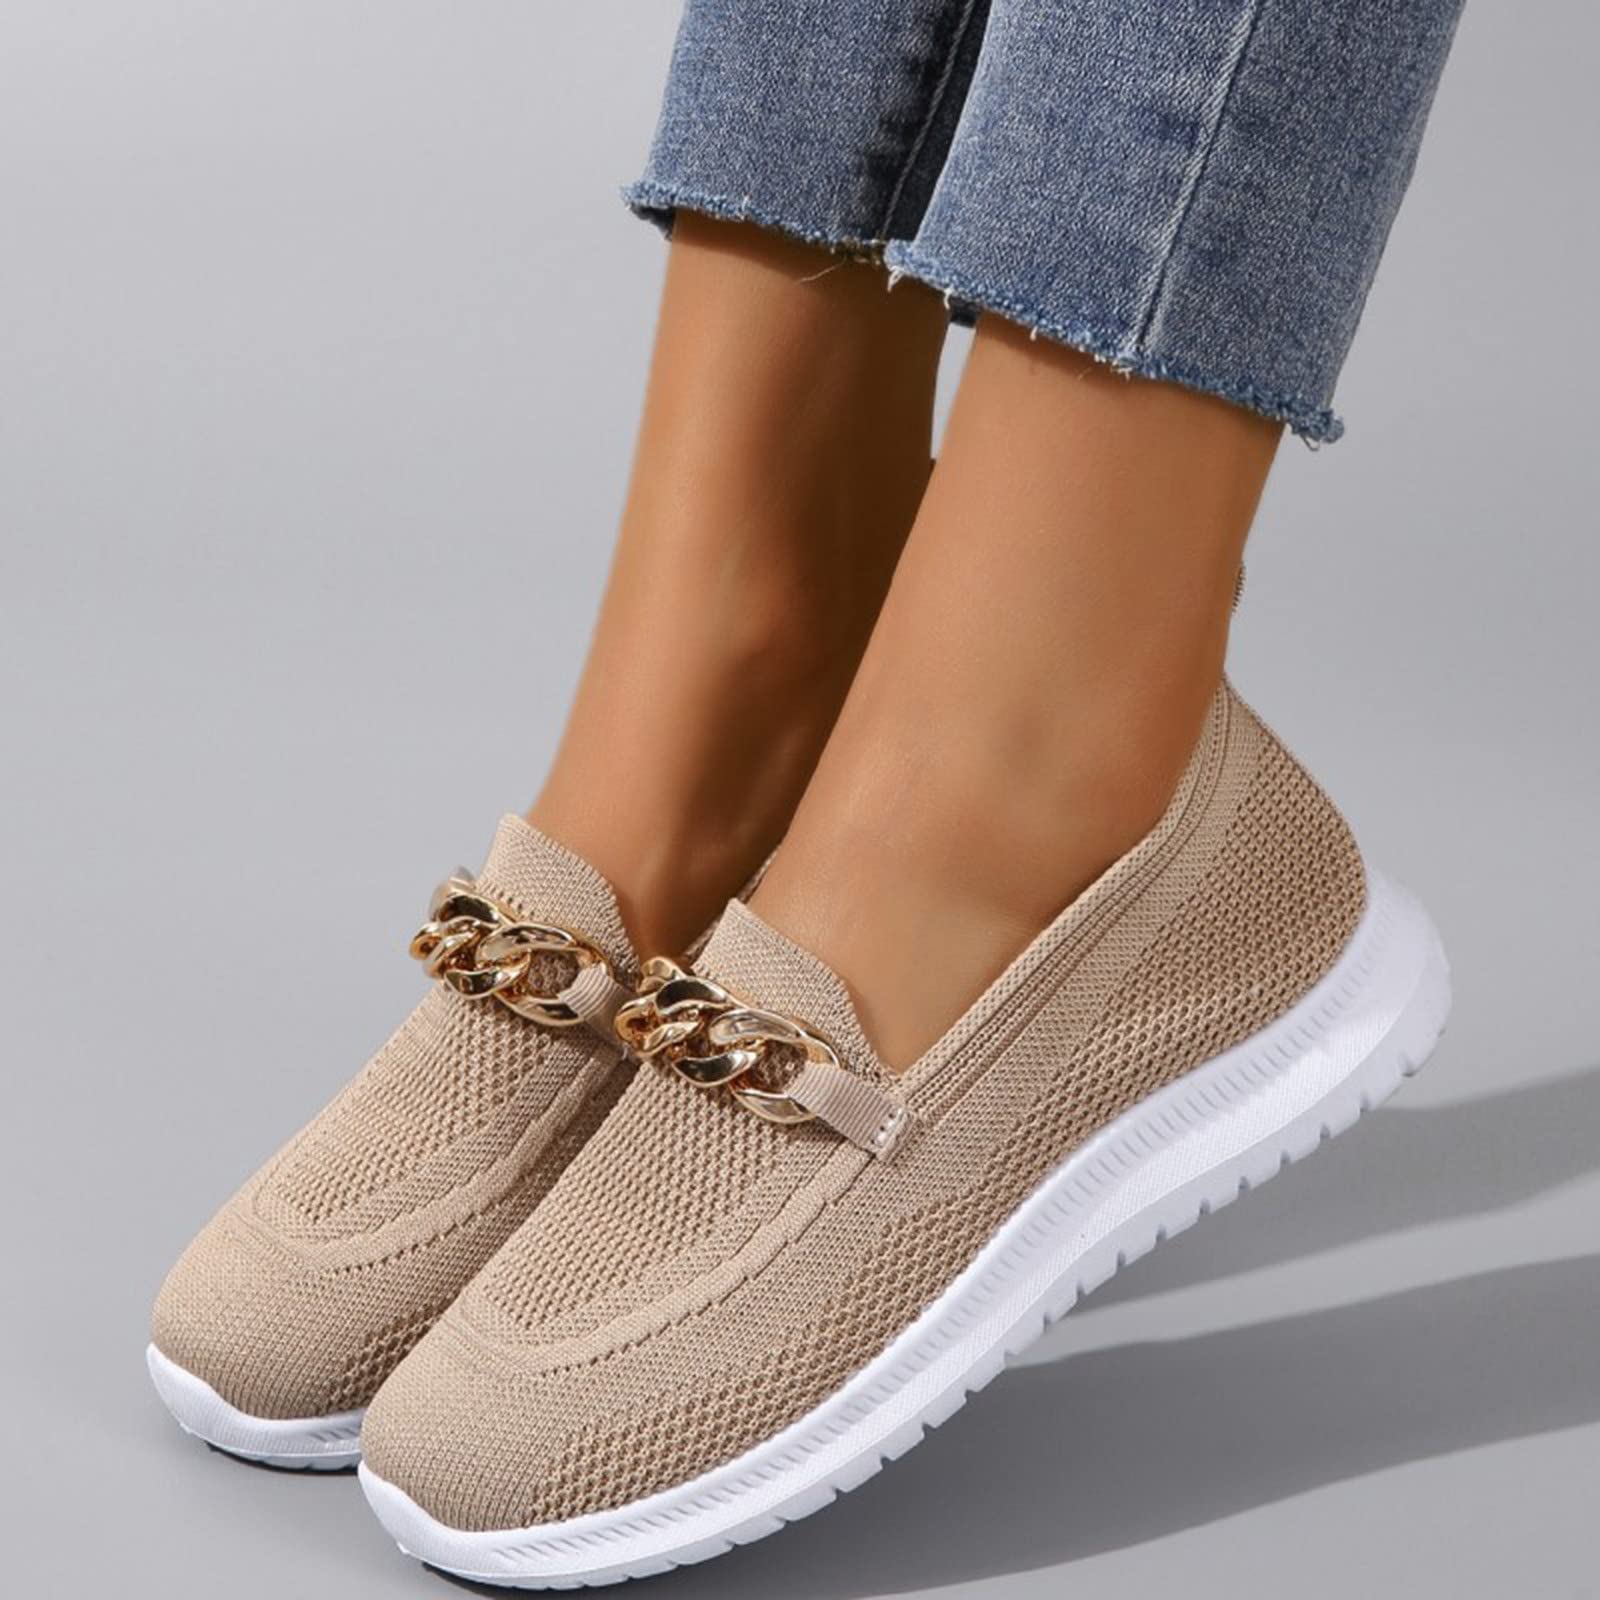 Hbeylia Platform Slip On Mesh Sneakers for Women Casual Breathable Mesh Air Cushion Metal Chain Design Trendy Chunky Bottom Low Top Canvas Shoes Flats Walking Shoes Play Sneakers Loafers Khaki